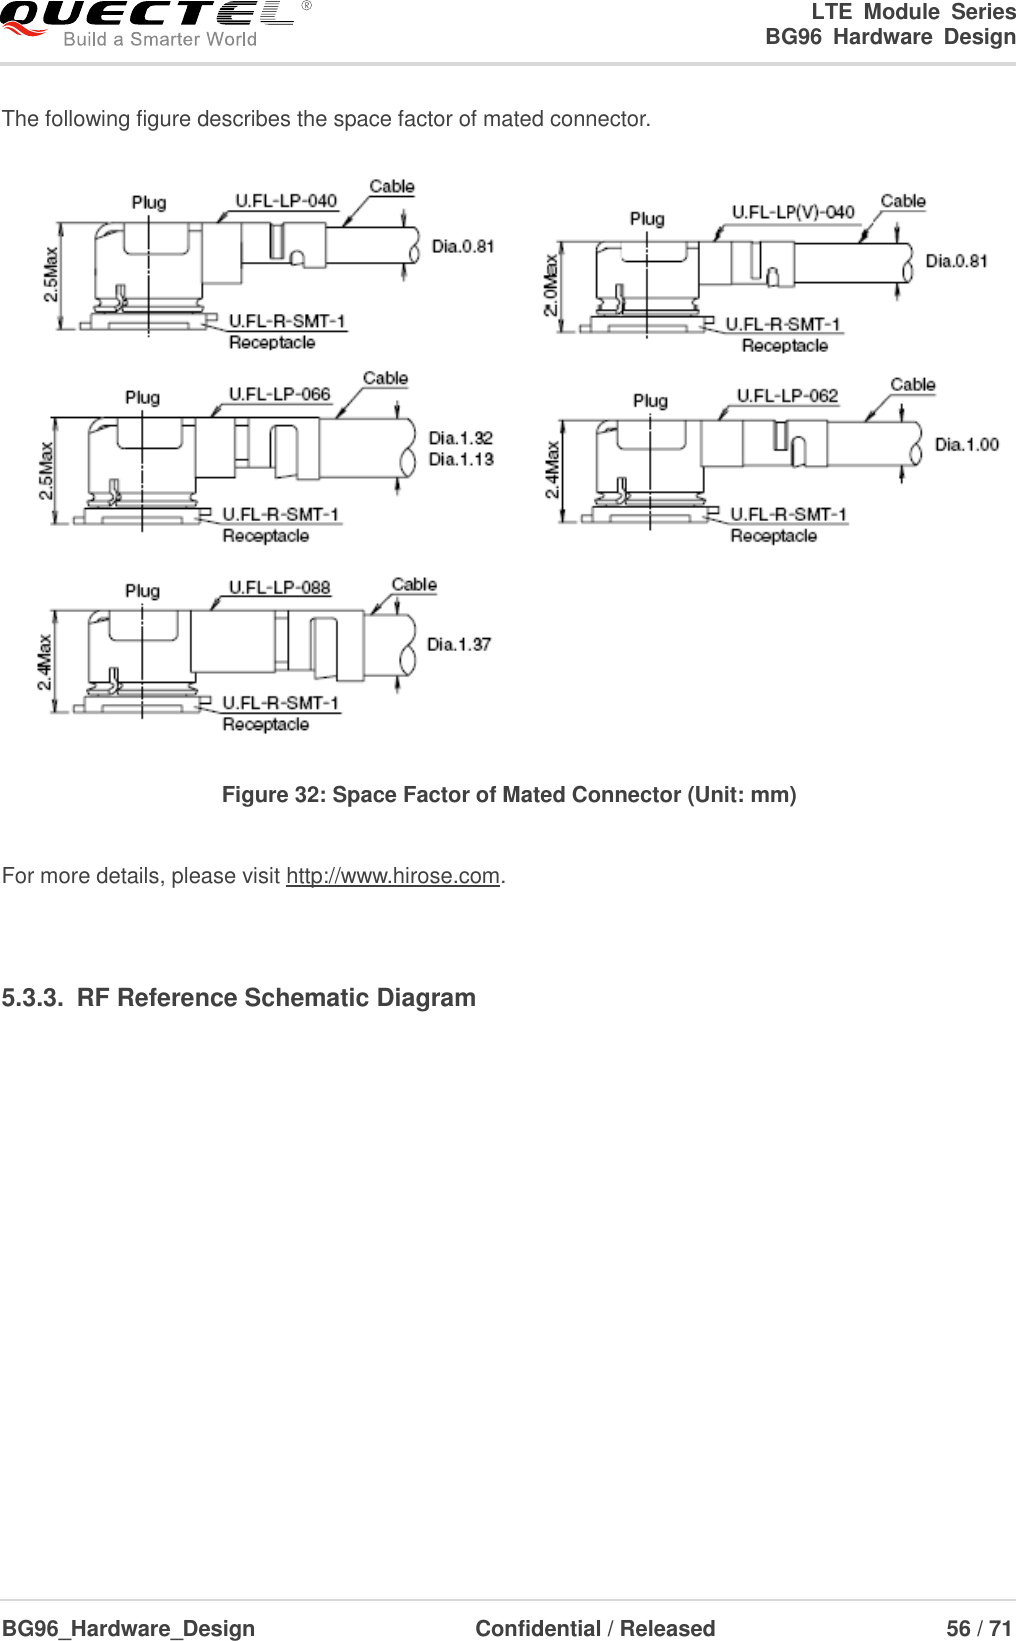 LTE  Module  Series                                                  BG96  Hardware  Design  BG96_Hardware_Design                              Confidential / Released                             56 / 71    The following figure describes the space factor of mated connector.  Figure 32: Space Factor of Mated Connector (Unit: mm)  For more details, please visit http://www.hirose.com.     5.3.3.  RF Reference Schematic Diagram  